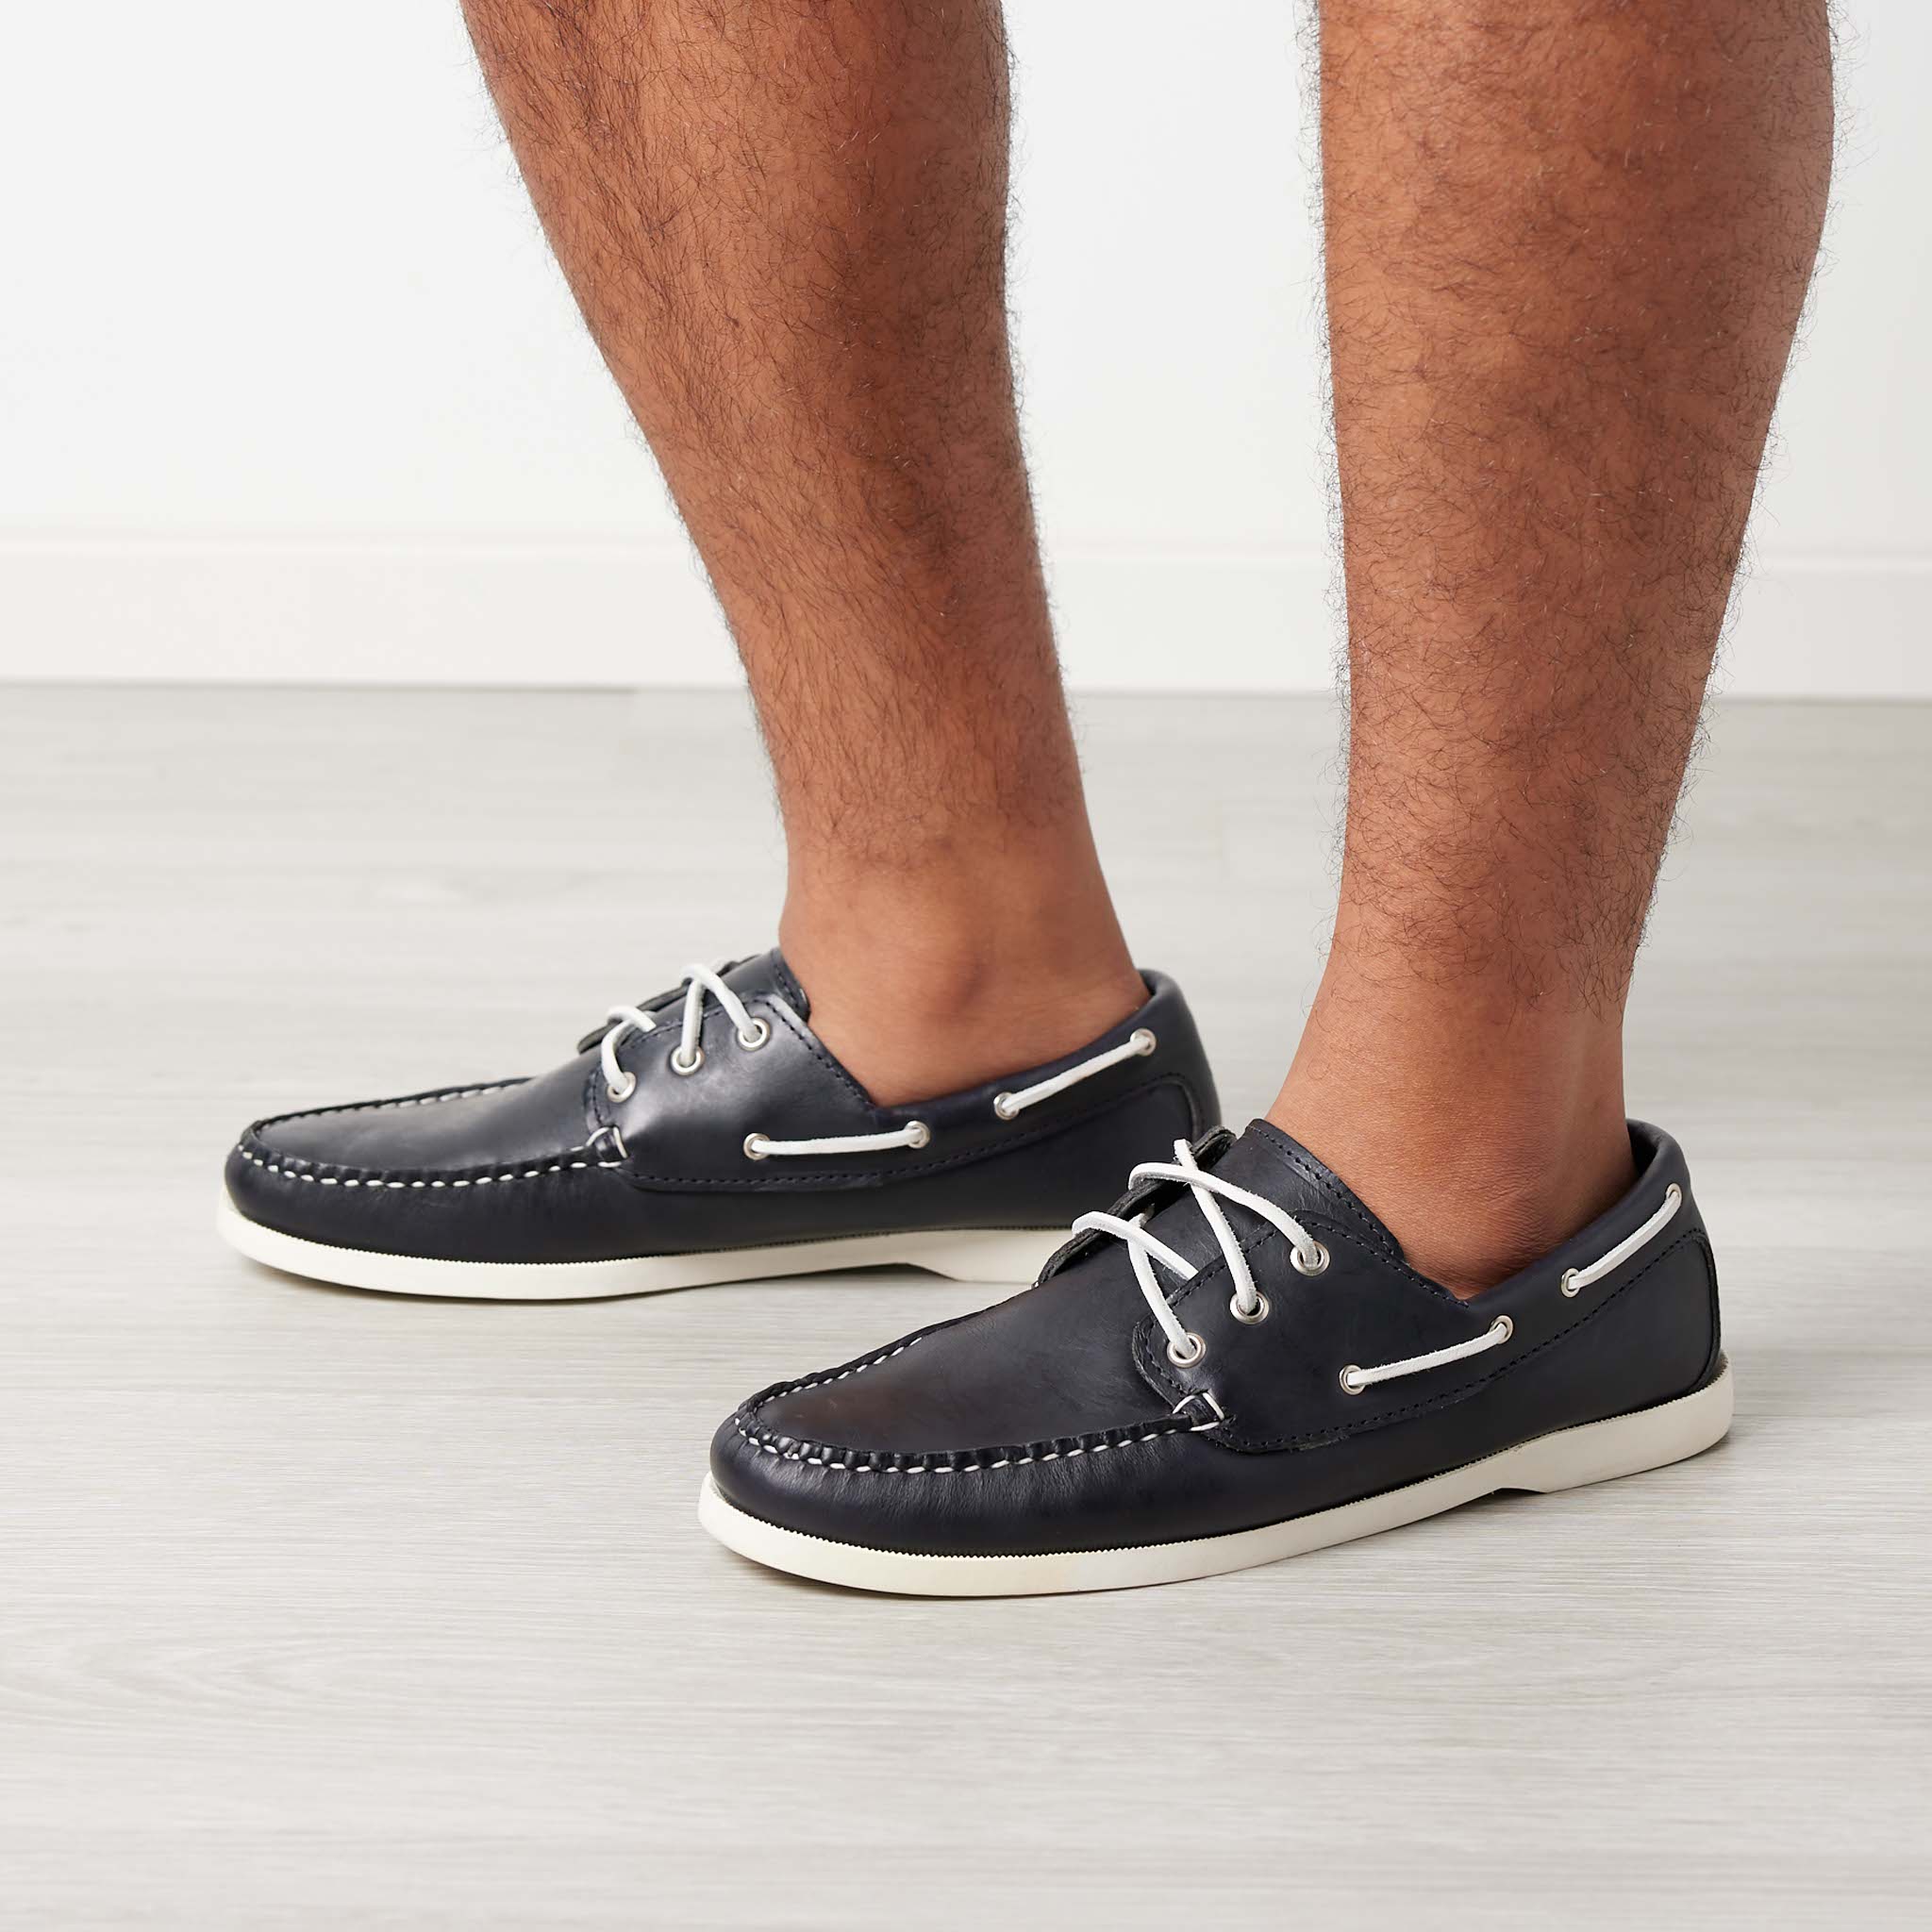 Casual Confidence with Men's Boat Shoes